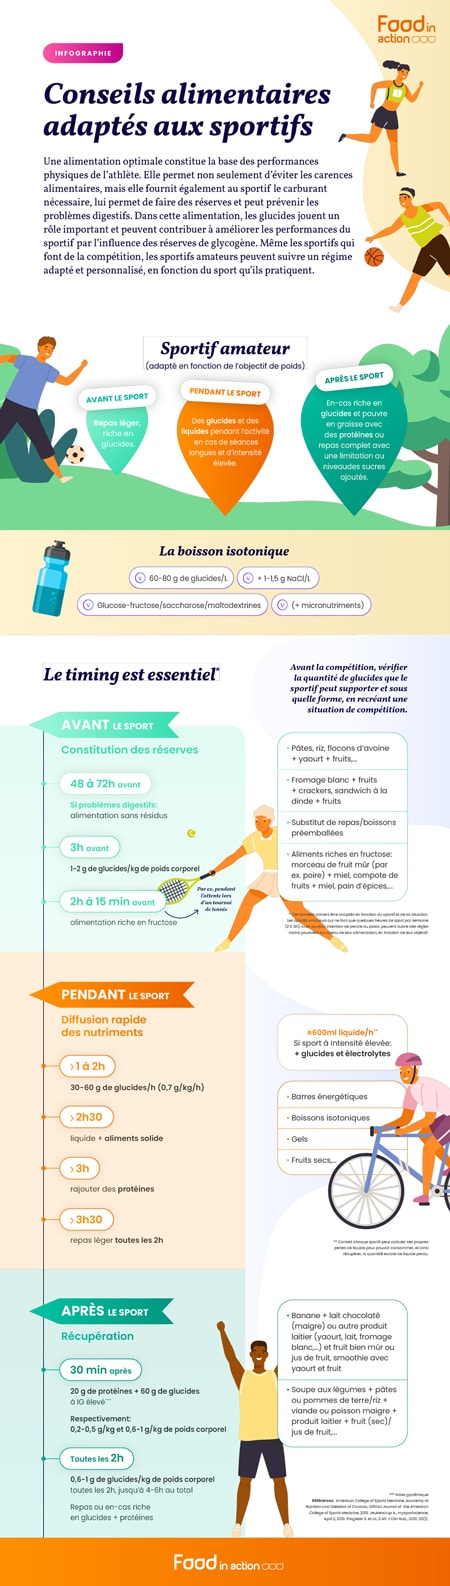 infographie-conseils-alimentaires-adaptes-sportifs